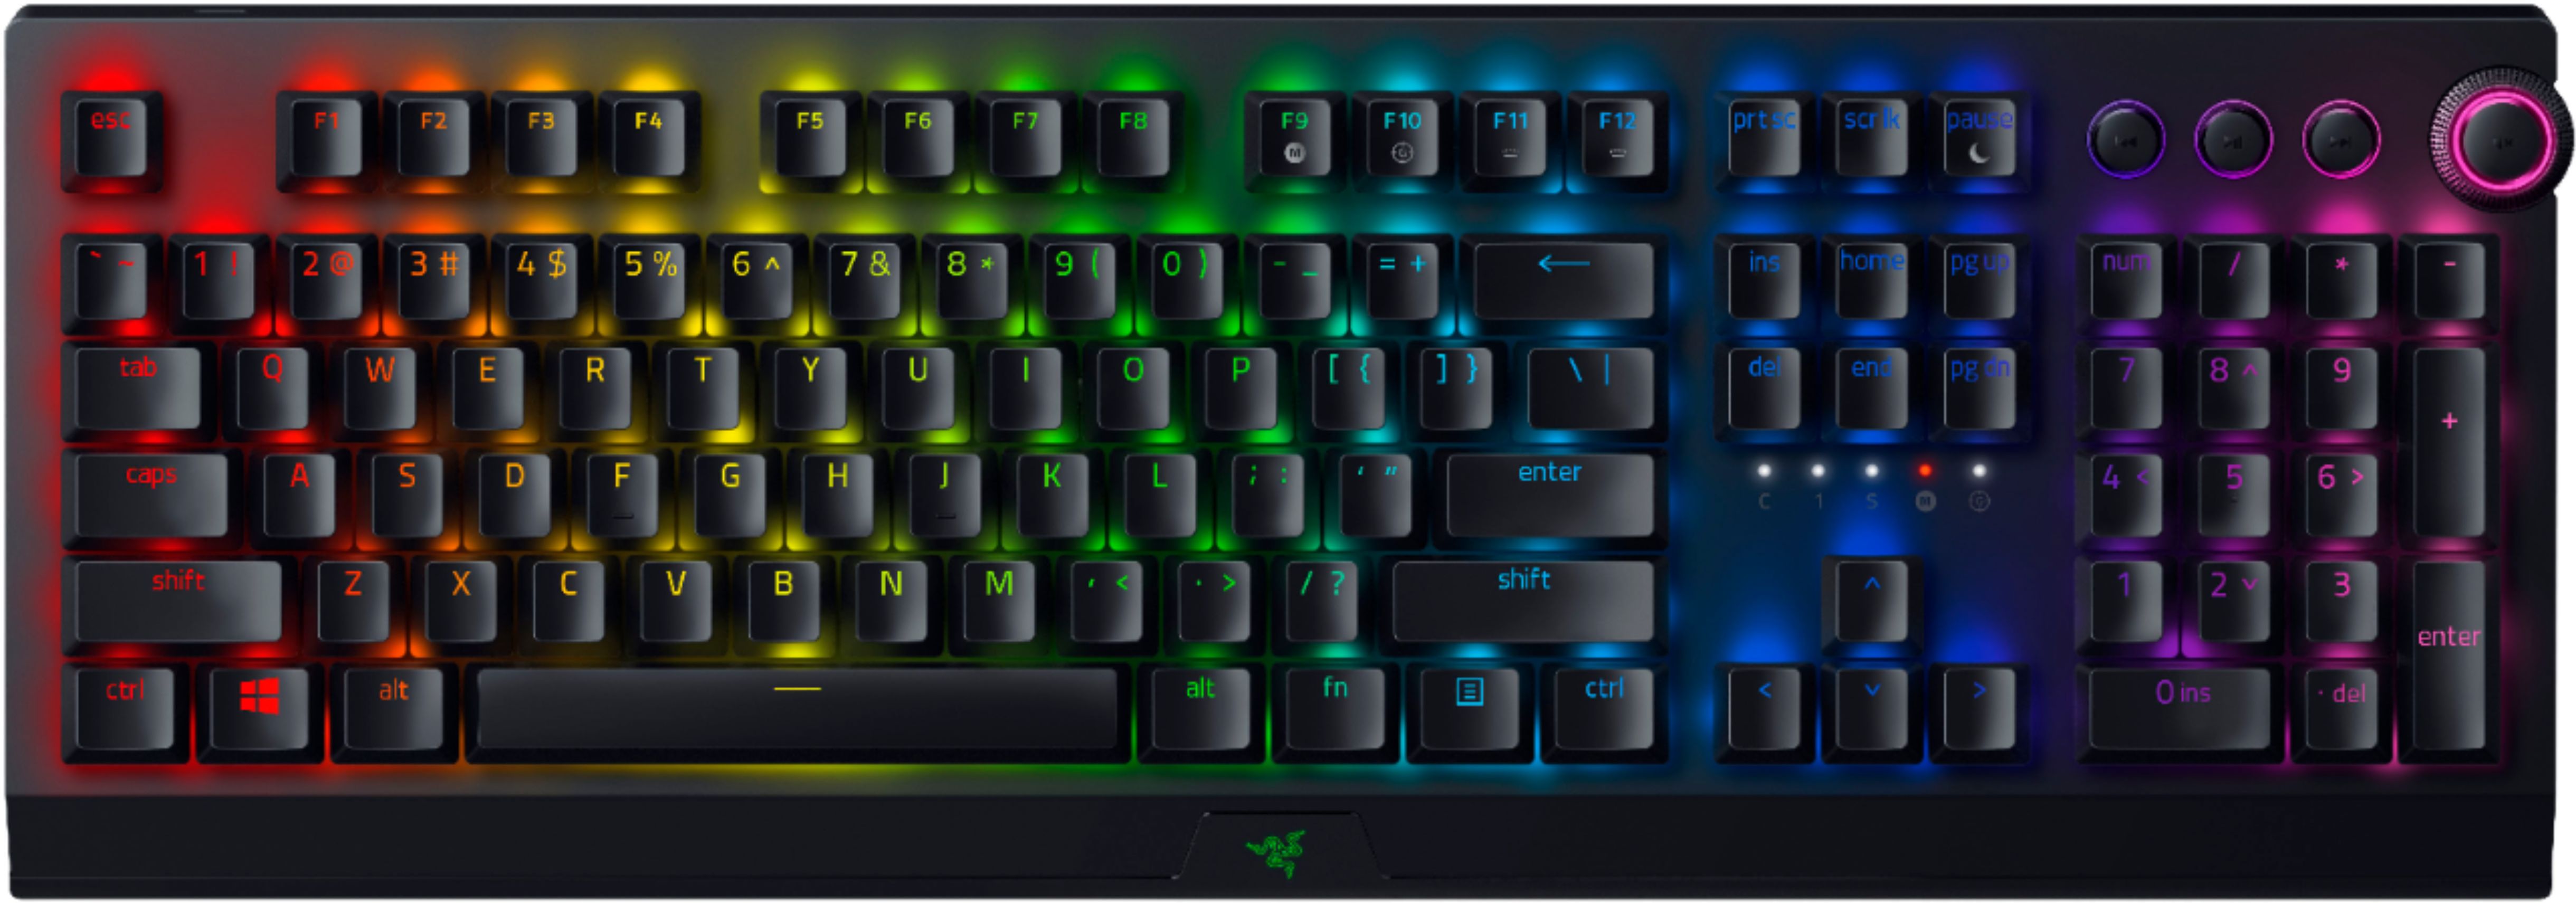  Razer BlackWidow V3 Pro Mechanical Wireless Gaming Keyboard:  Green Mechanical Switches - Tactile & Clicky - Chroma RGB Lighting -  Doubleshot ABS Keycaps - Transparent Switch Housing - Bluetooth/2.4GHz :  Video Games